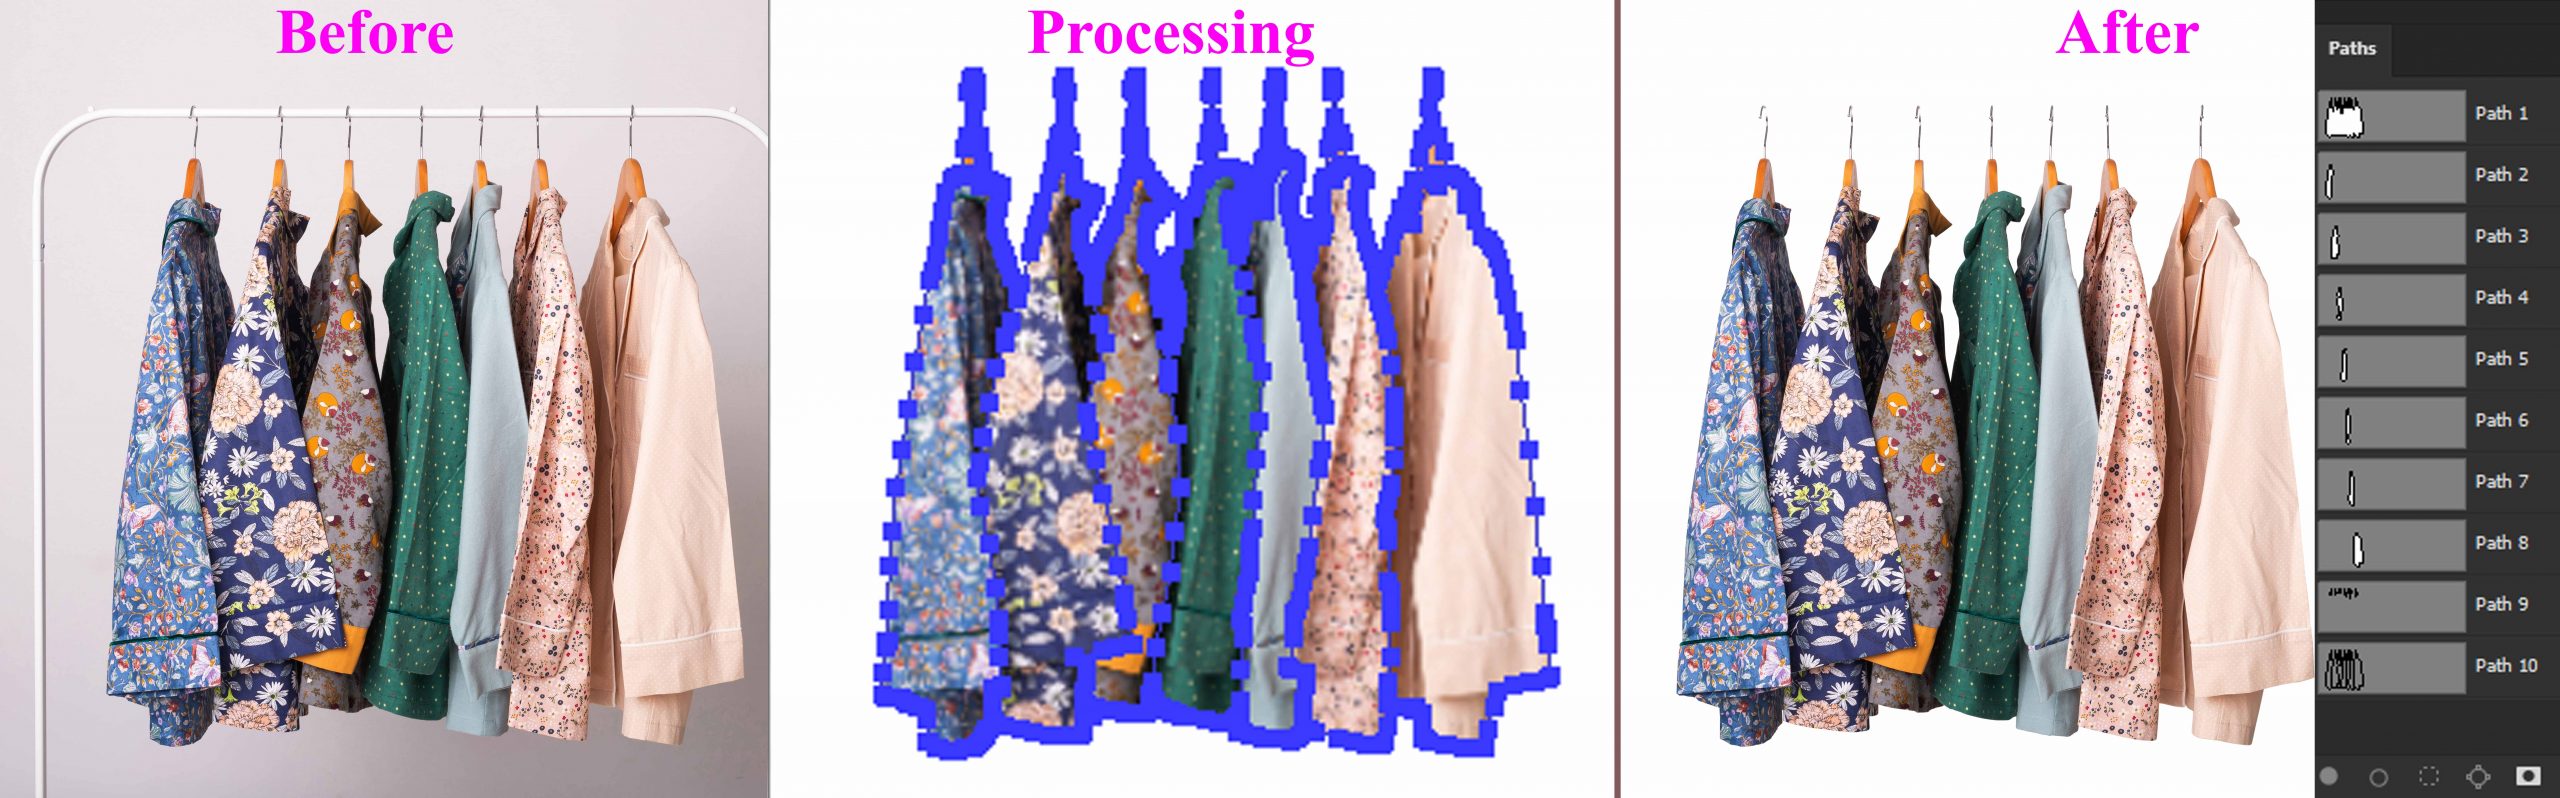 How Clipping Path Service Can Help Business Growth